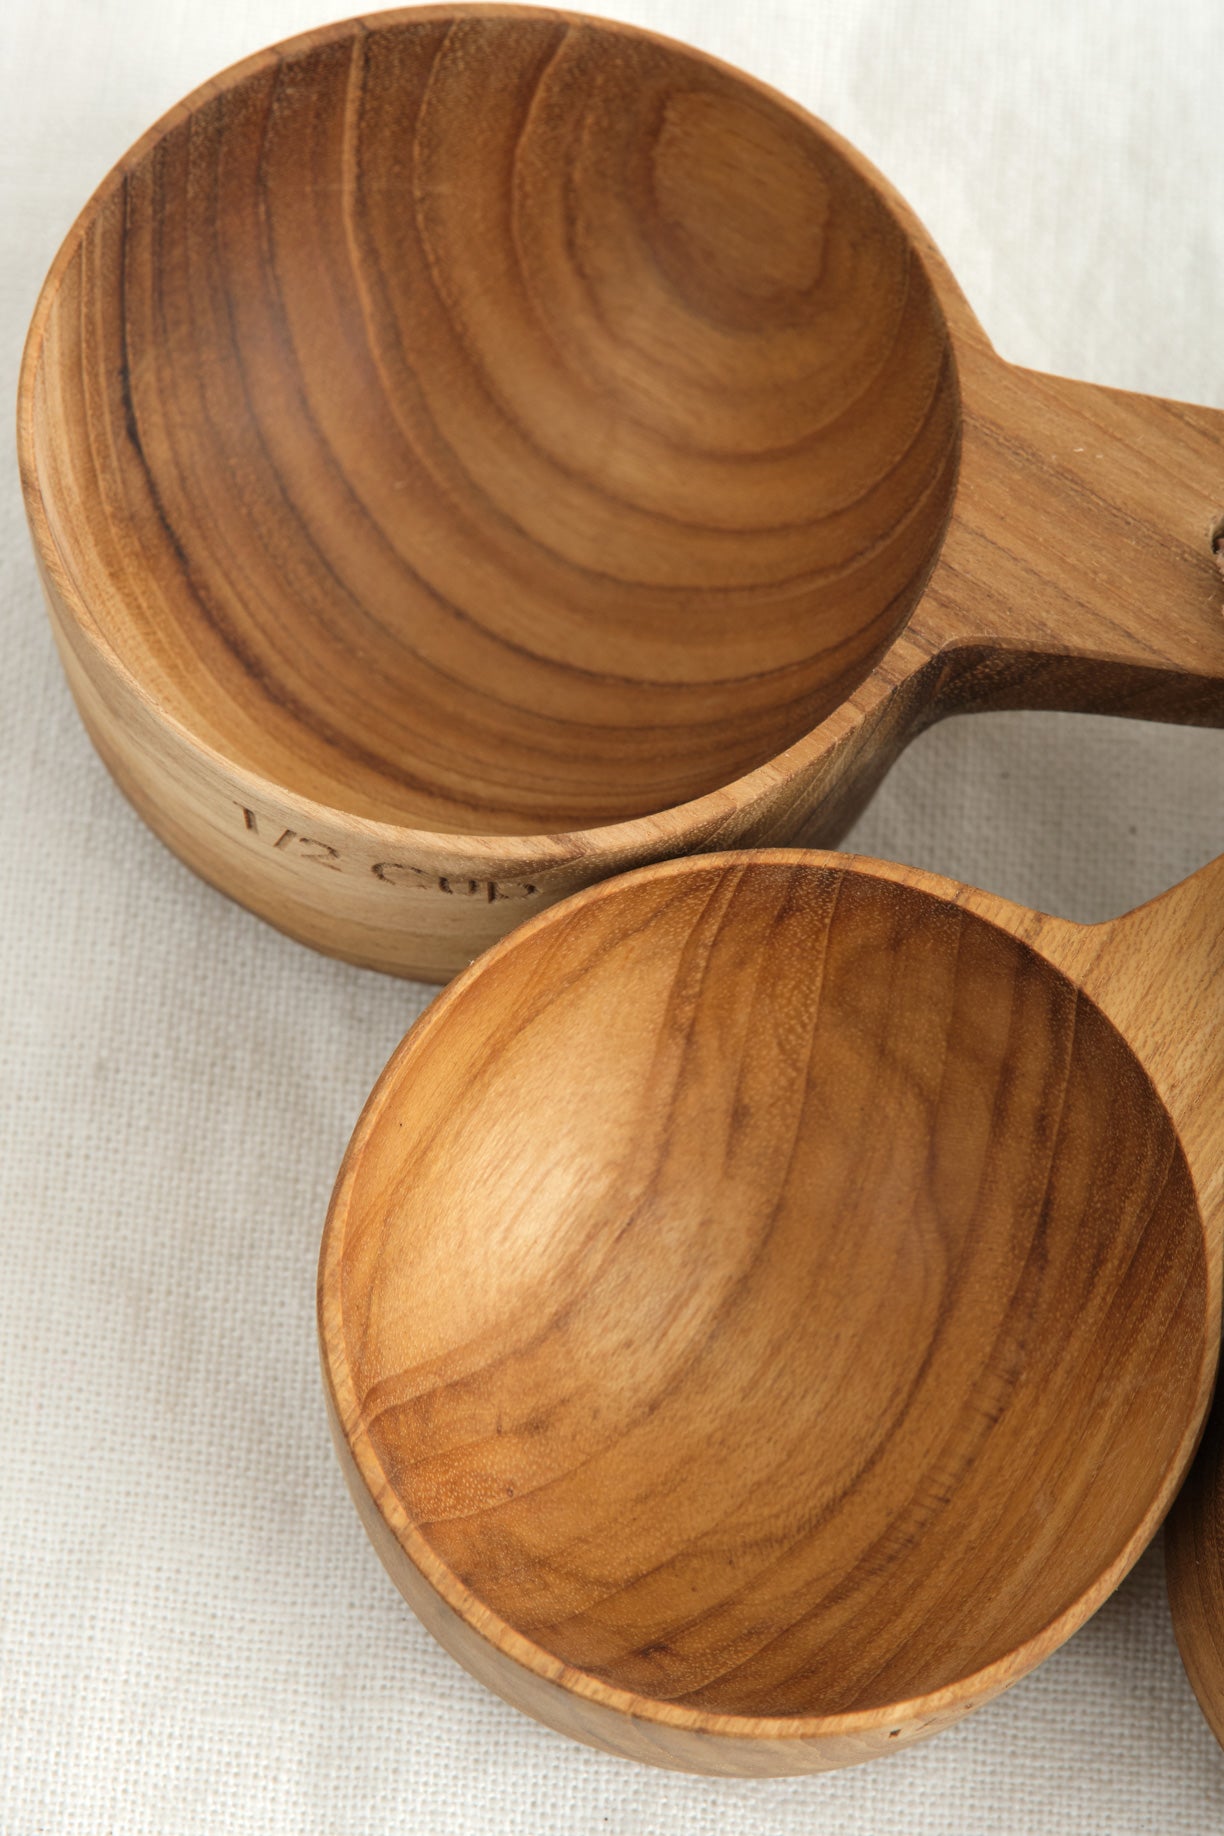 Teak Measuring Cups with Handle, Set of 4